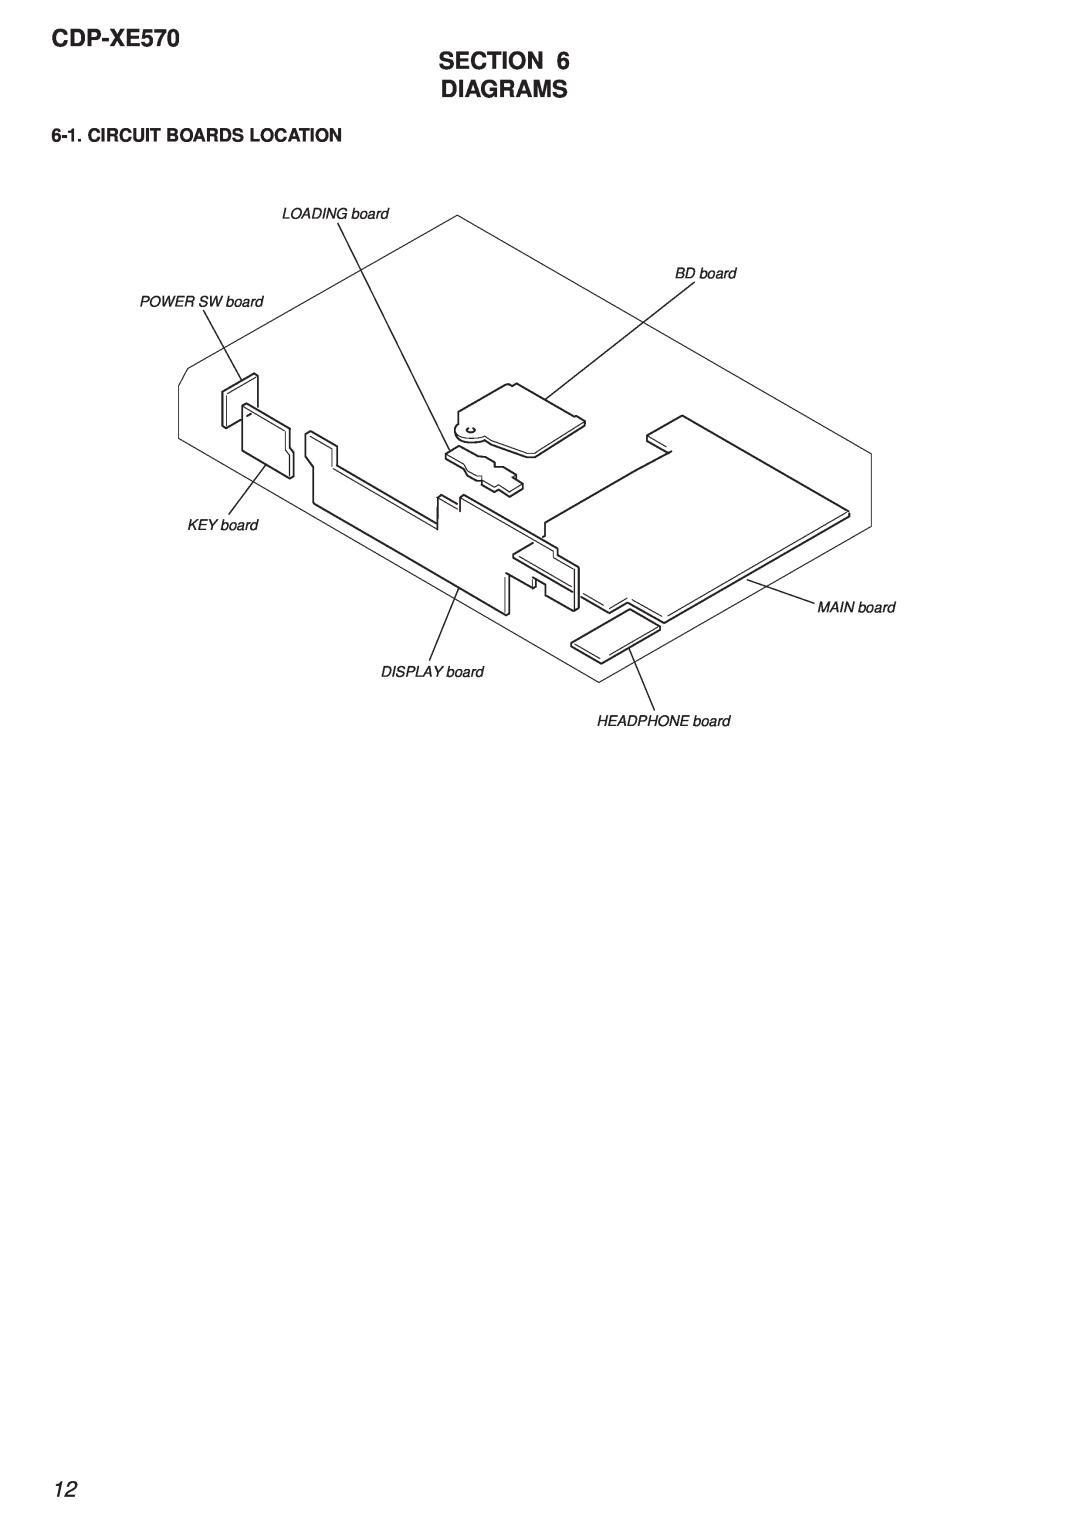 Sony Ericsson specifications CDP-XE570 SECTION DIAGRAMS, Circuit Boards Location 